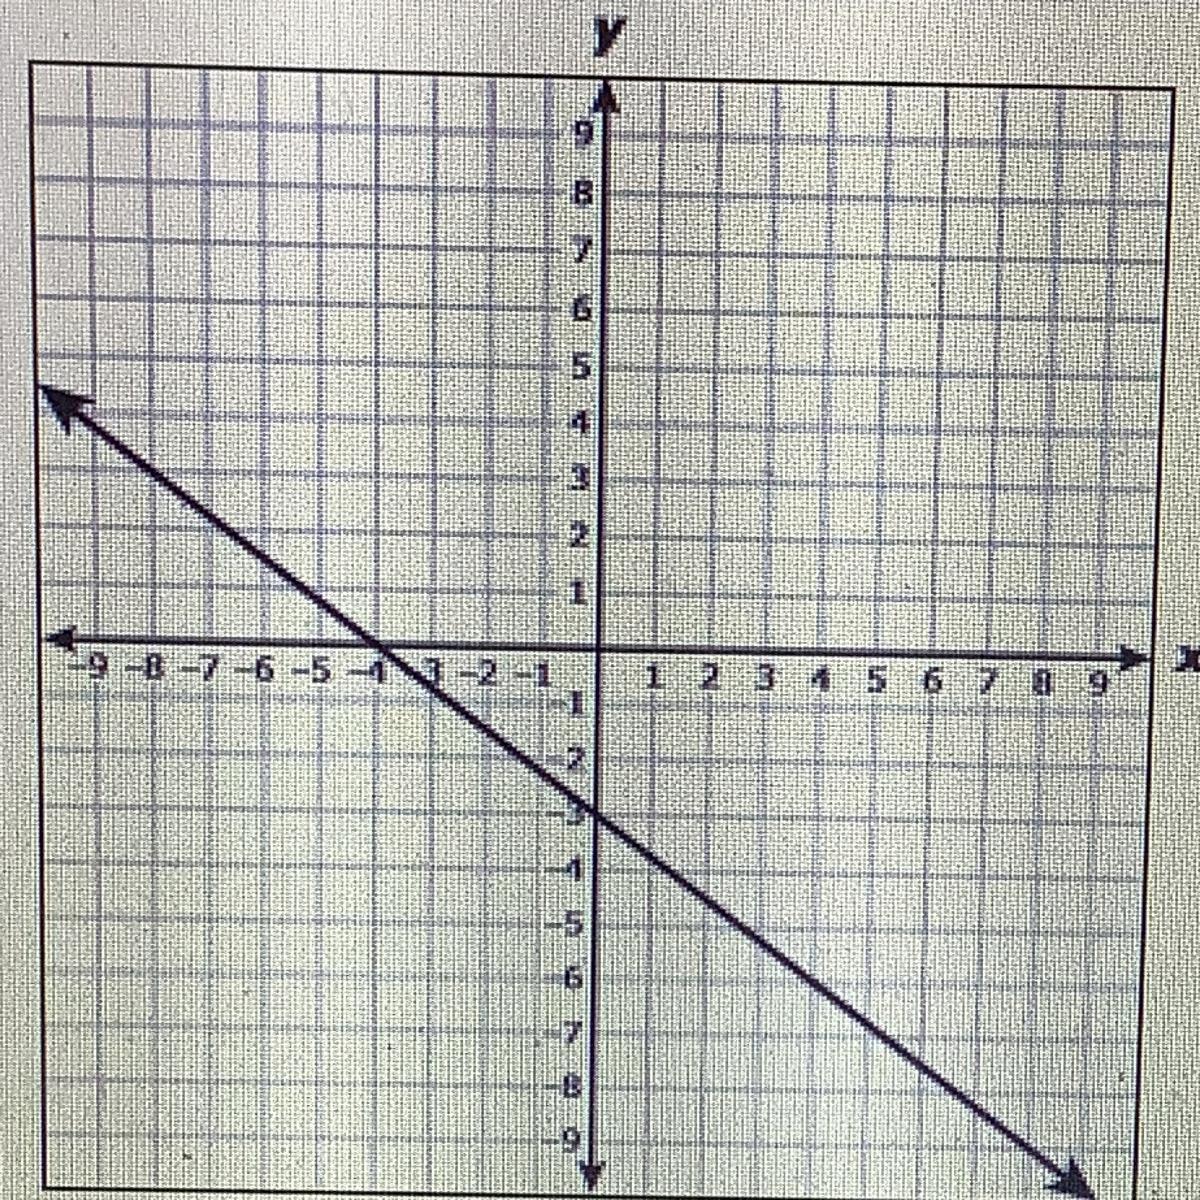 Please Help!Which Equation Best Represents The Relationship Between X And Y In The Graph?A. Y = -3/4x